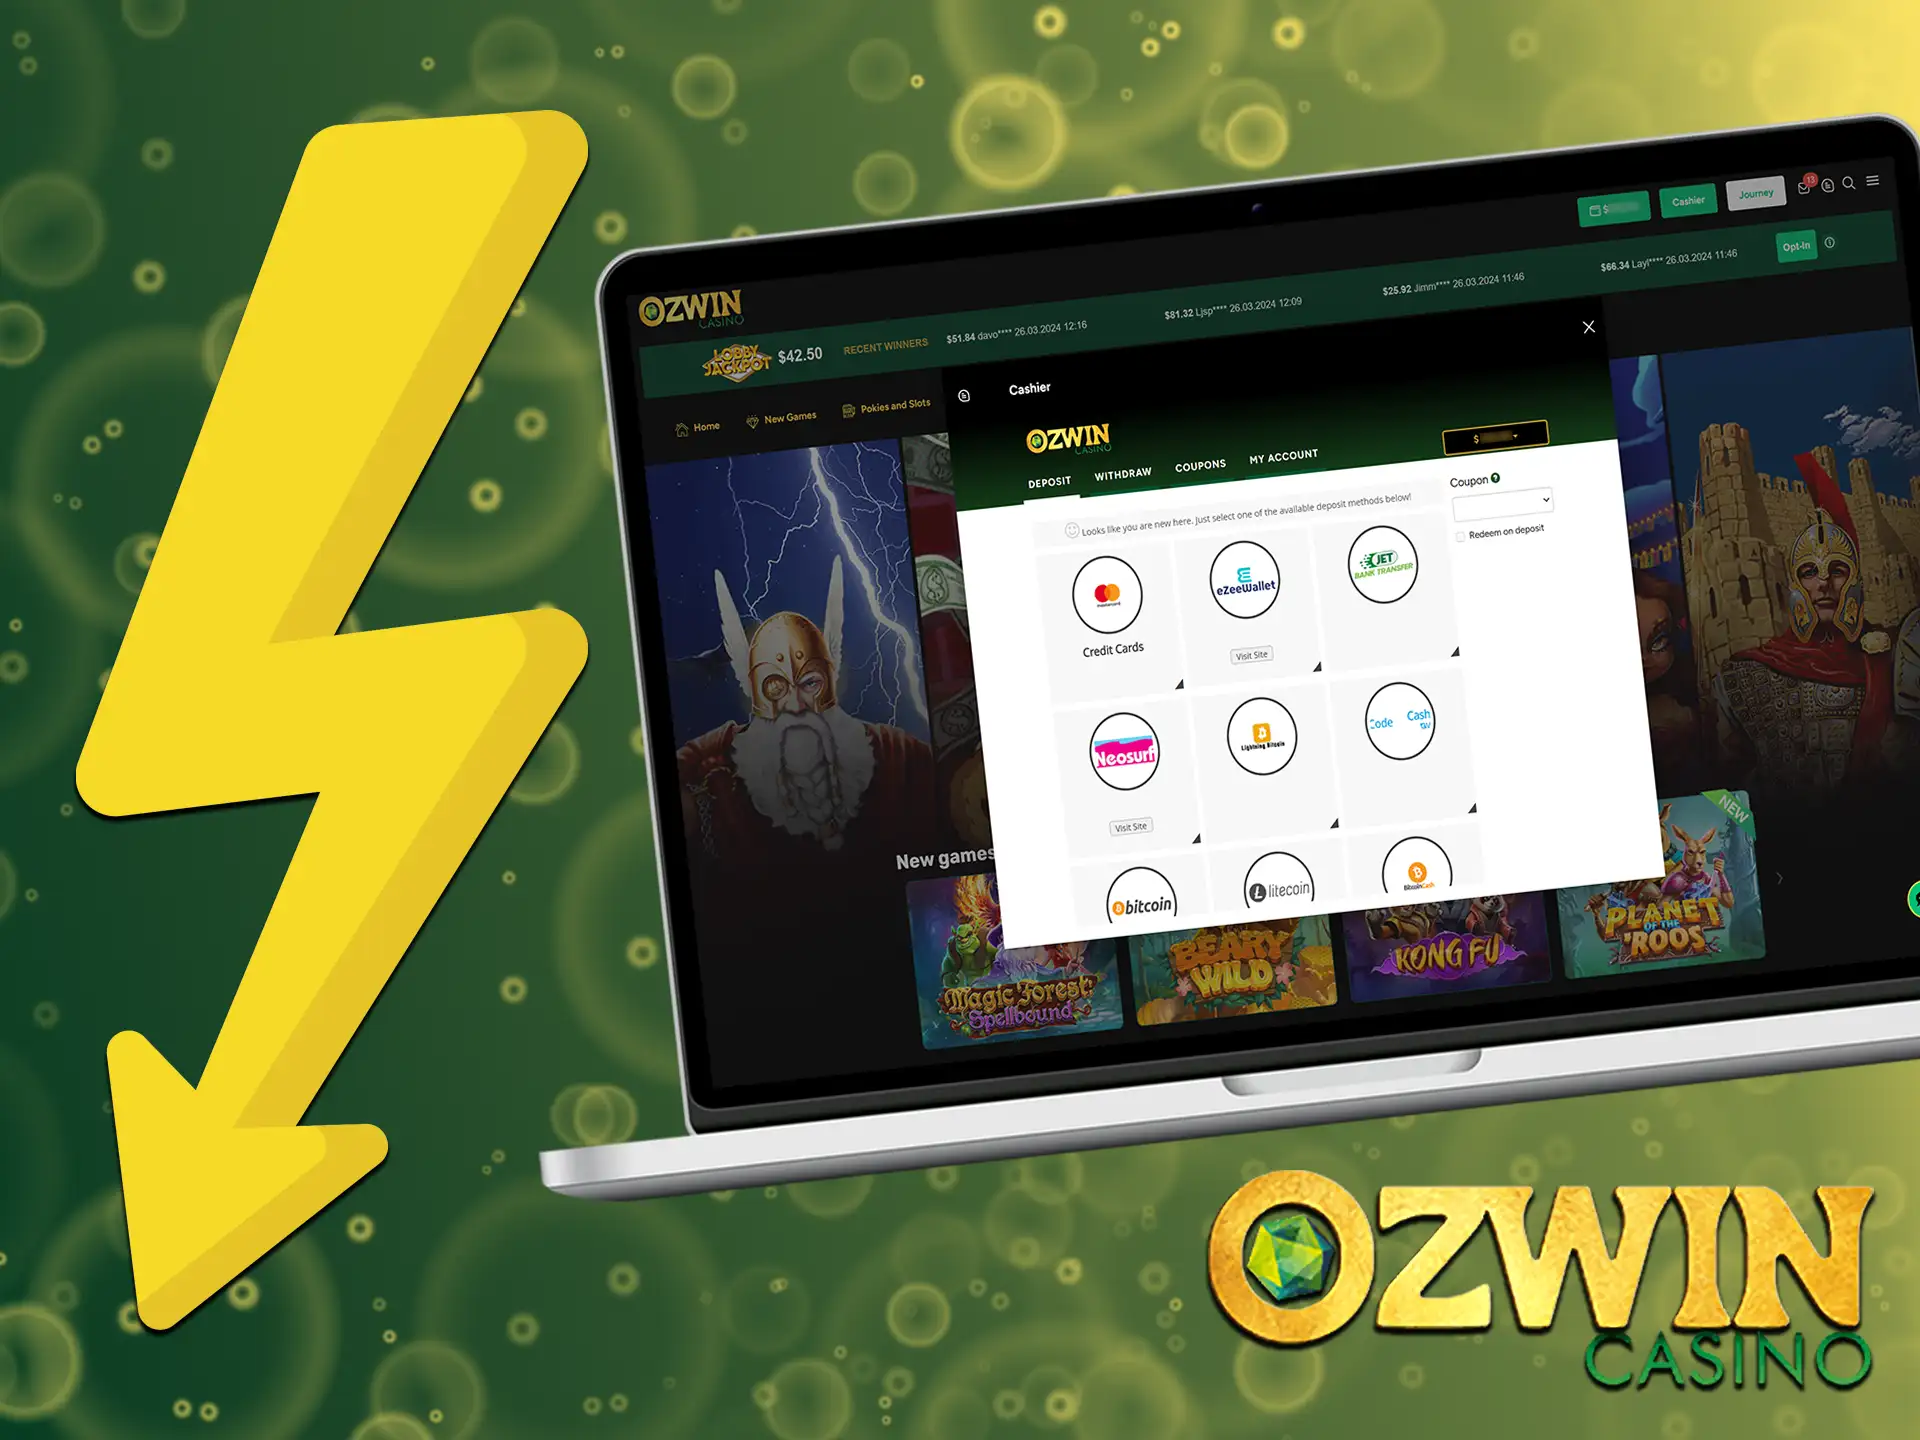 Skip the wait and fund your Ozwin account in seconds with cryptocurrencies.